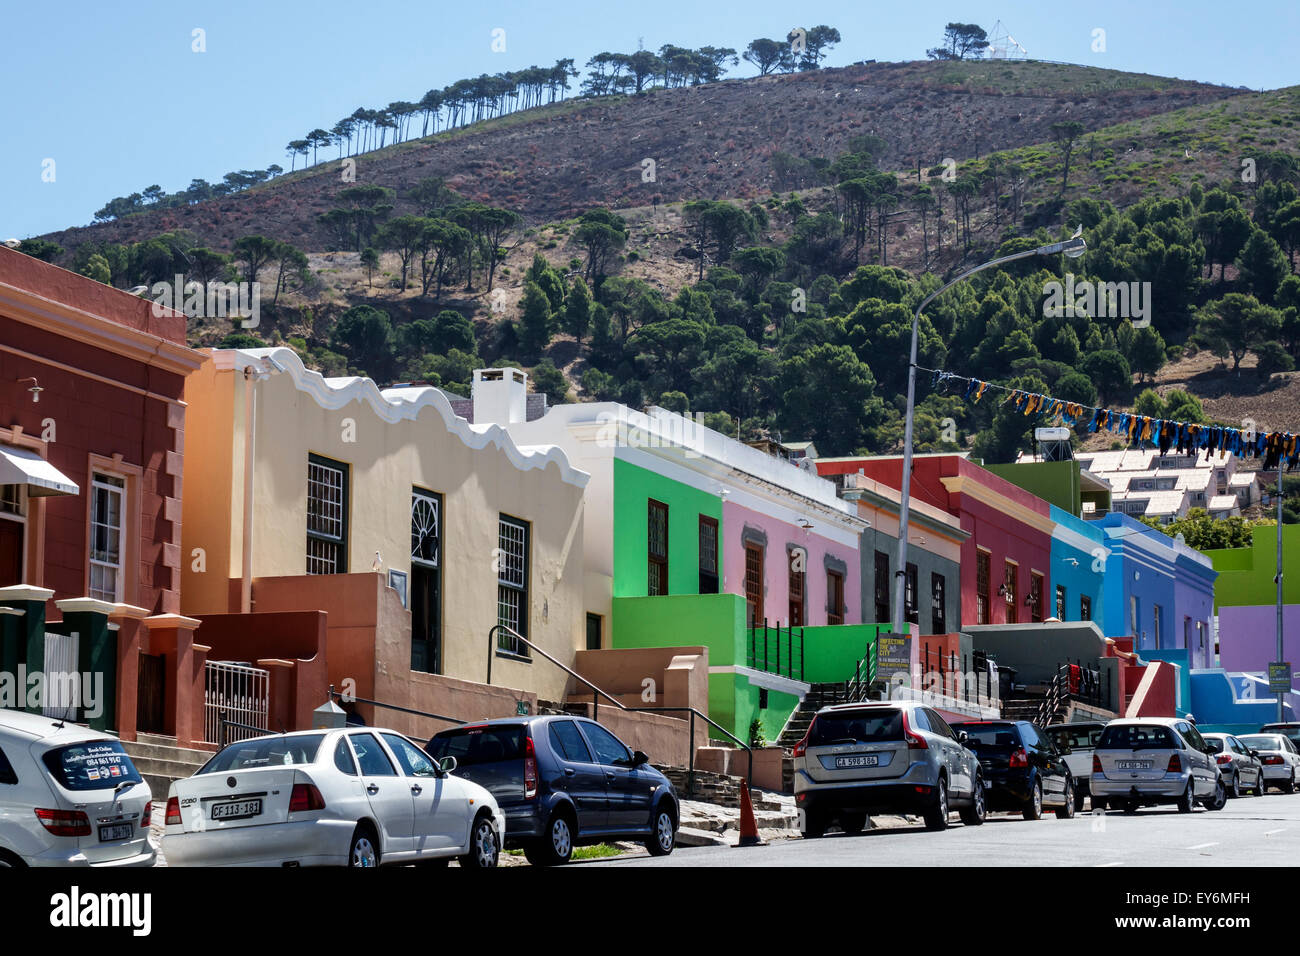 Cape Town South Africa,Bo-Kaap,Schotsche Kloof,Wale Street,Malay Quarter,Muslim,houses,homes,colorful,Signal Hill,SAfri150309130 Stock Photo